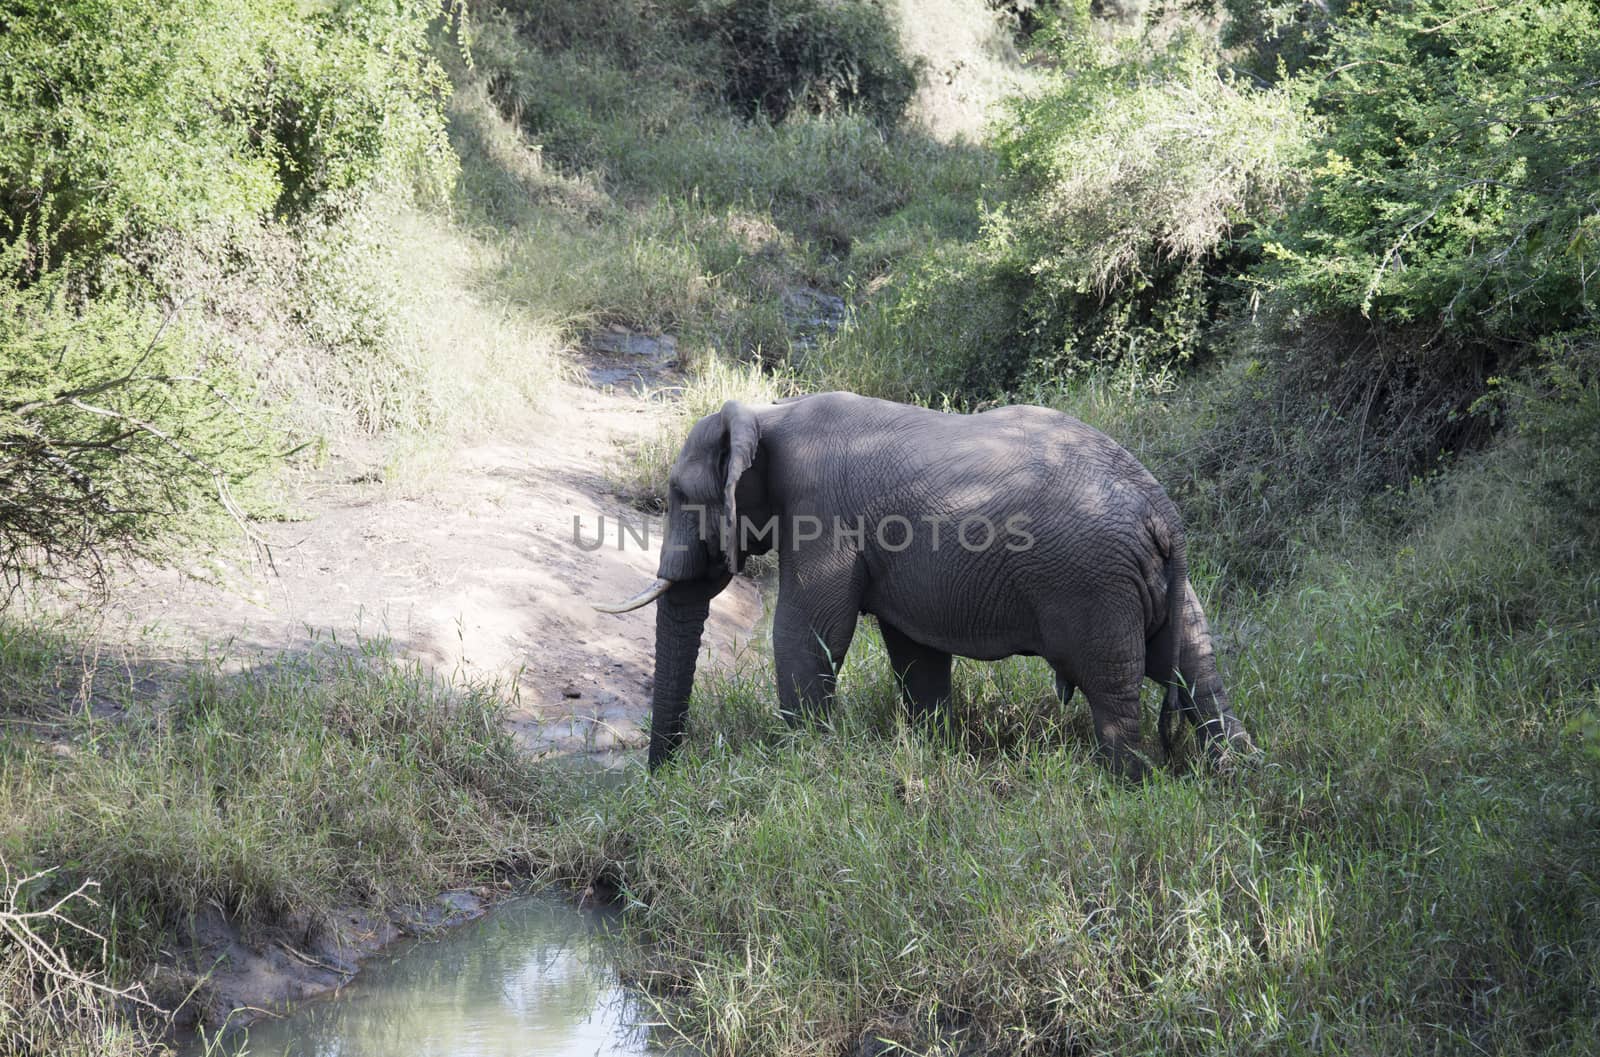 big elephant crossing the river by compuinfoto